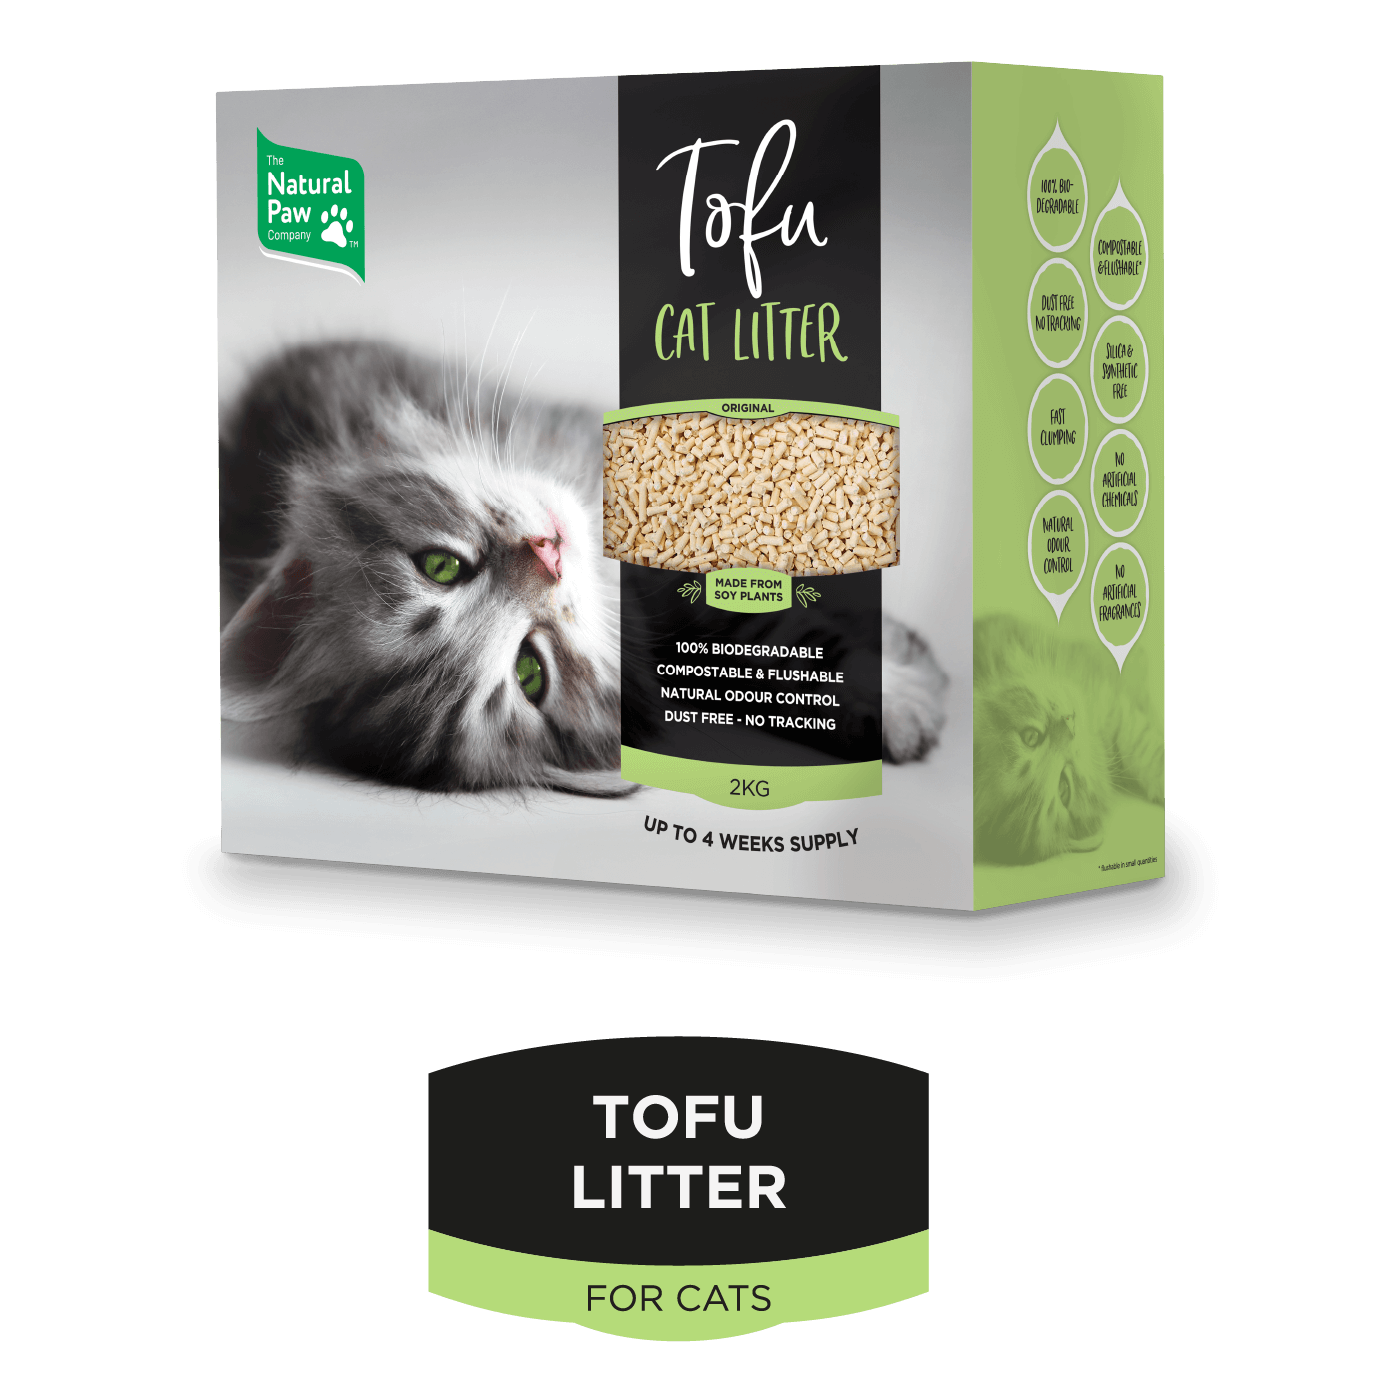 The Natural Paw Company Tofu Cat Litter